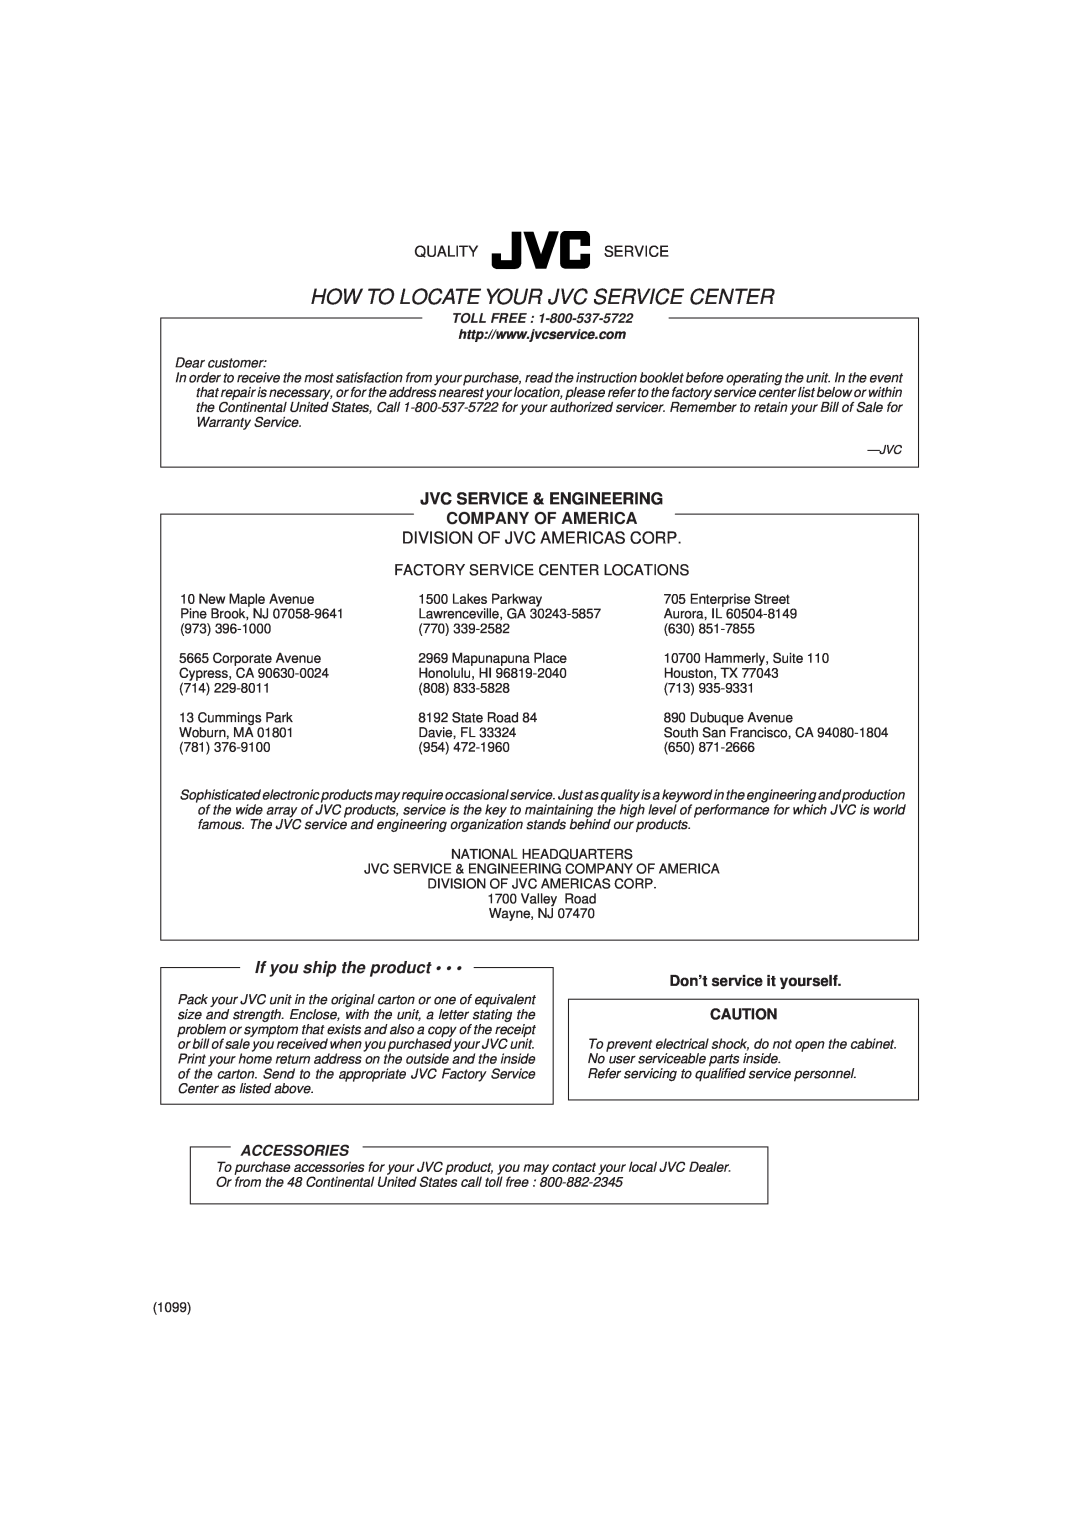 JVC FS-V30 manual Jvc Service & Engineering Company Of America, Division Of Jvc Americas Corp, Qualityservice, Accessories 